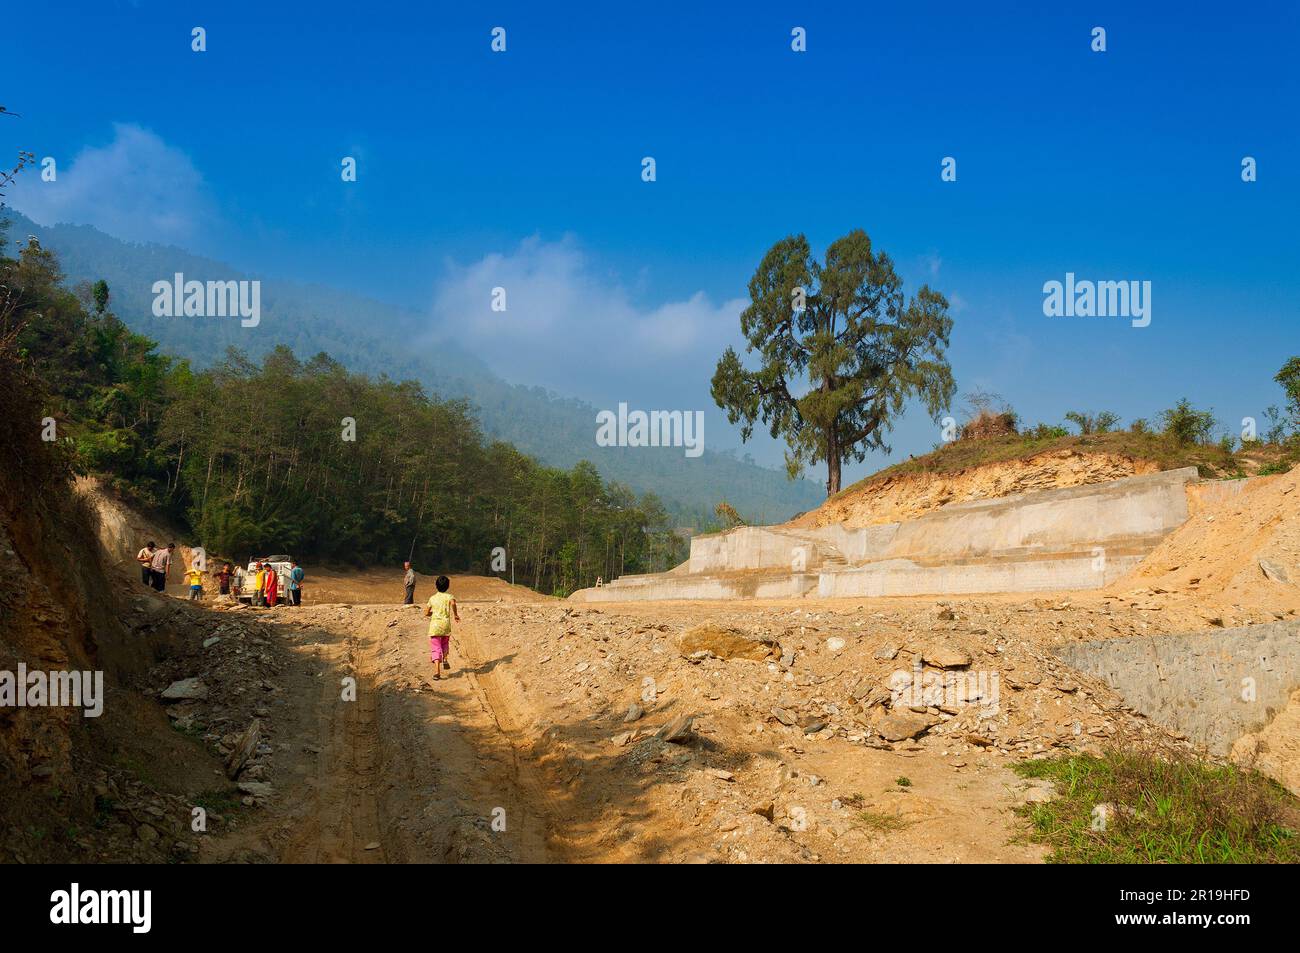 High altitude playground and stadium is being made by cutting tree and levelling Himalayan soil, Environmental damage to Himalayan mountains. Stock Photo